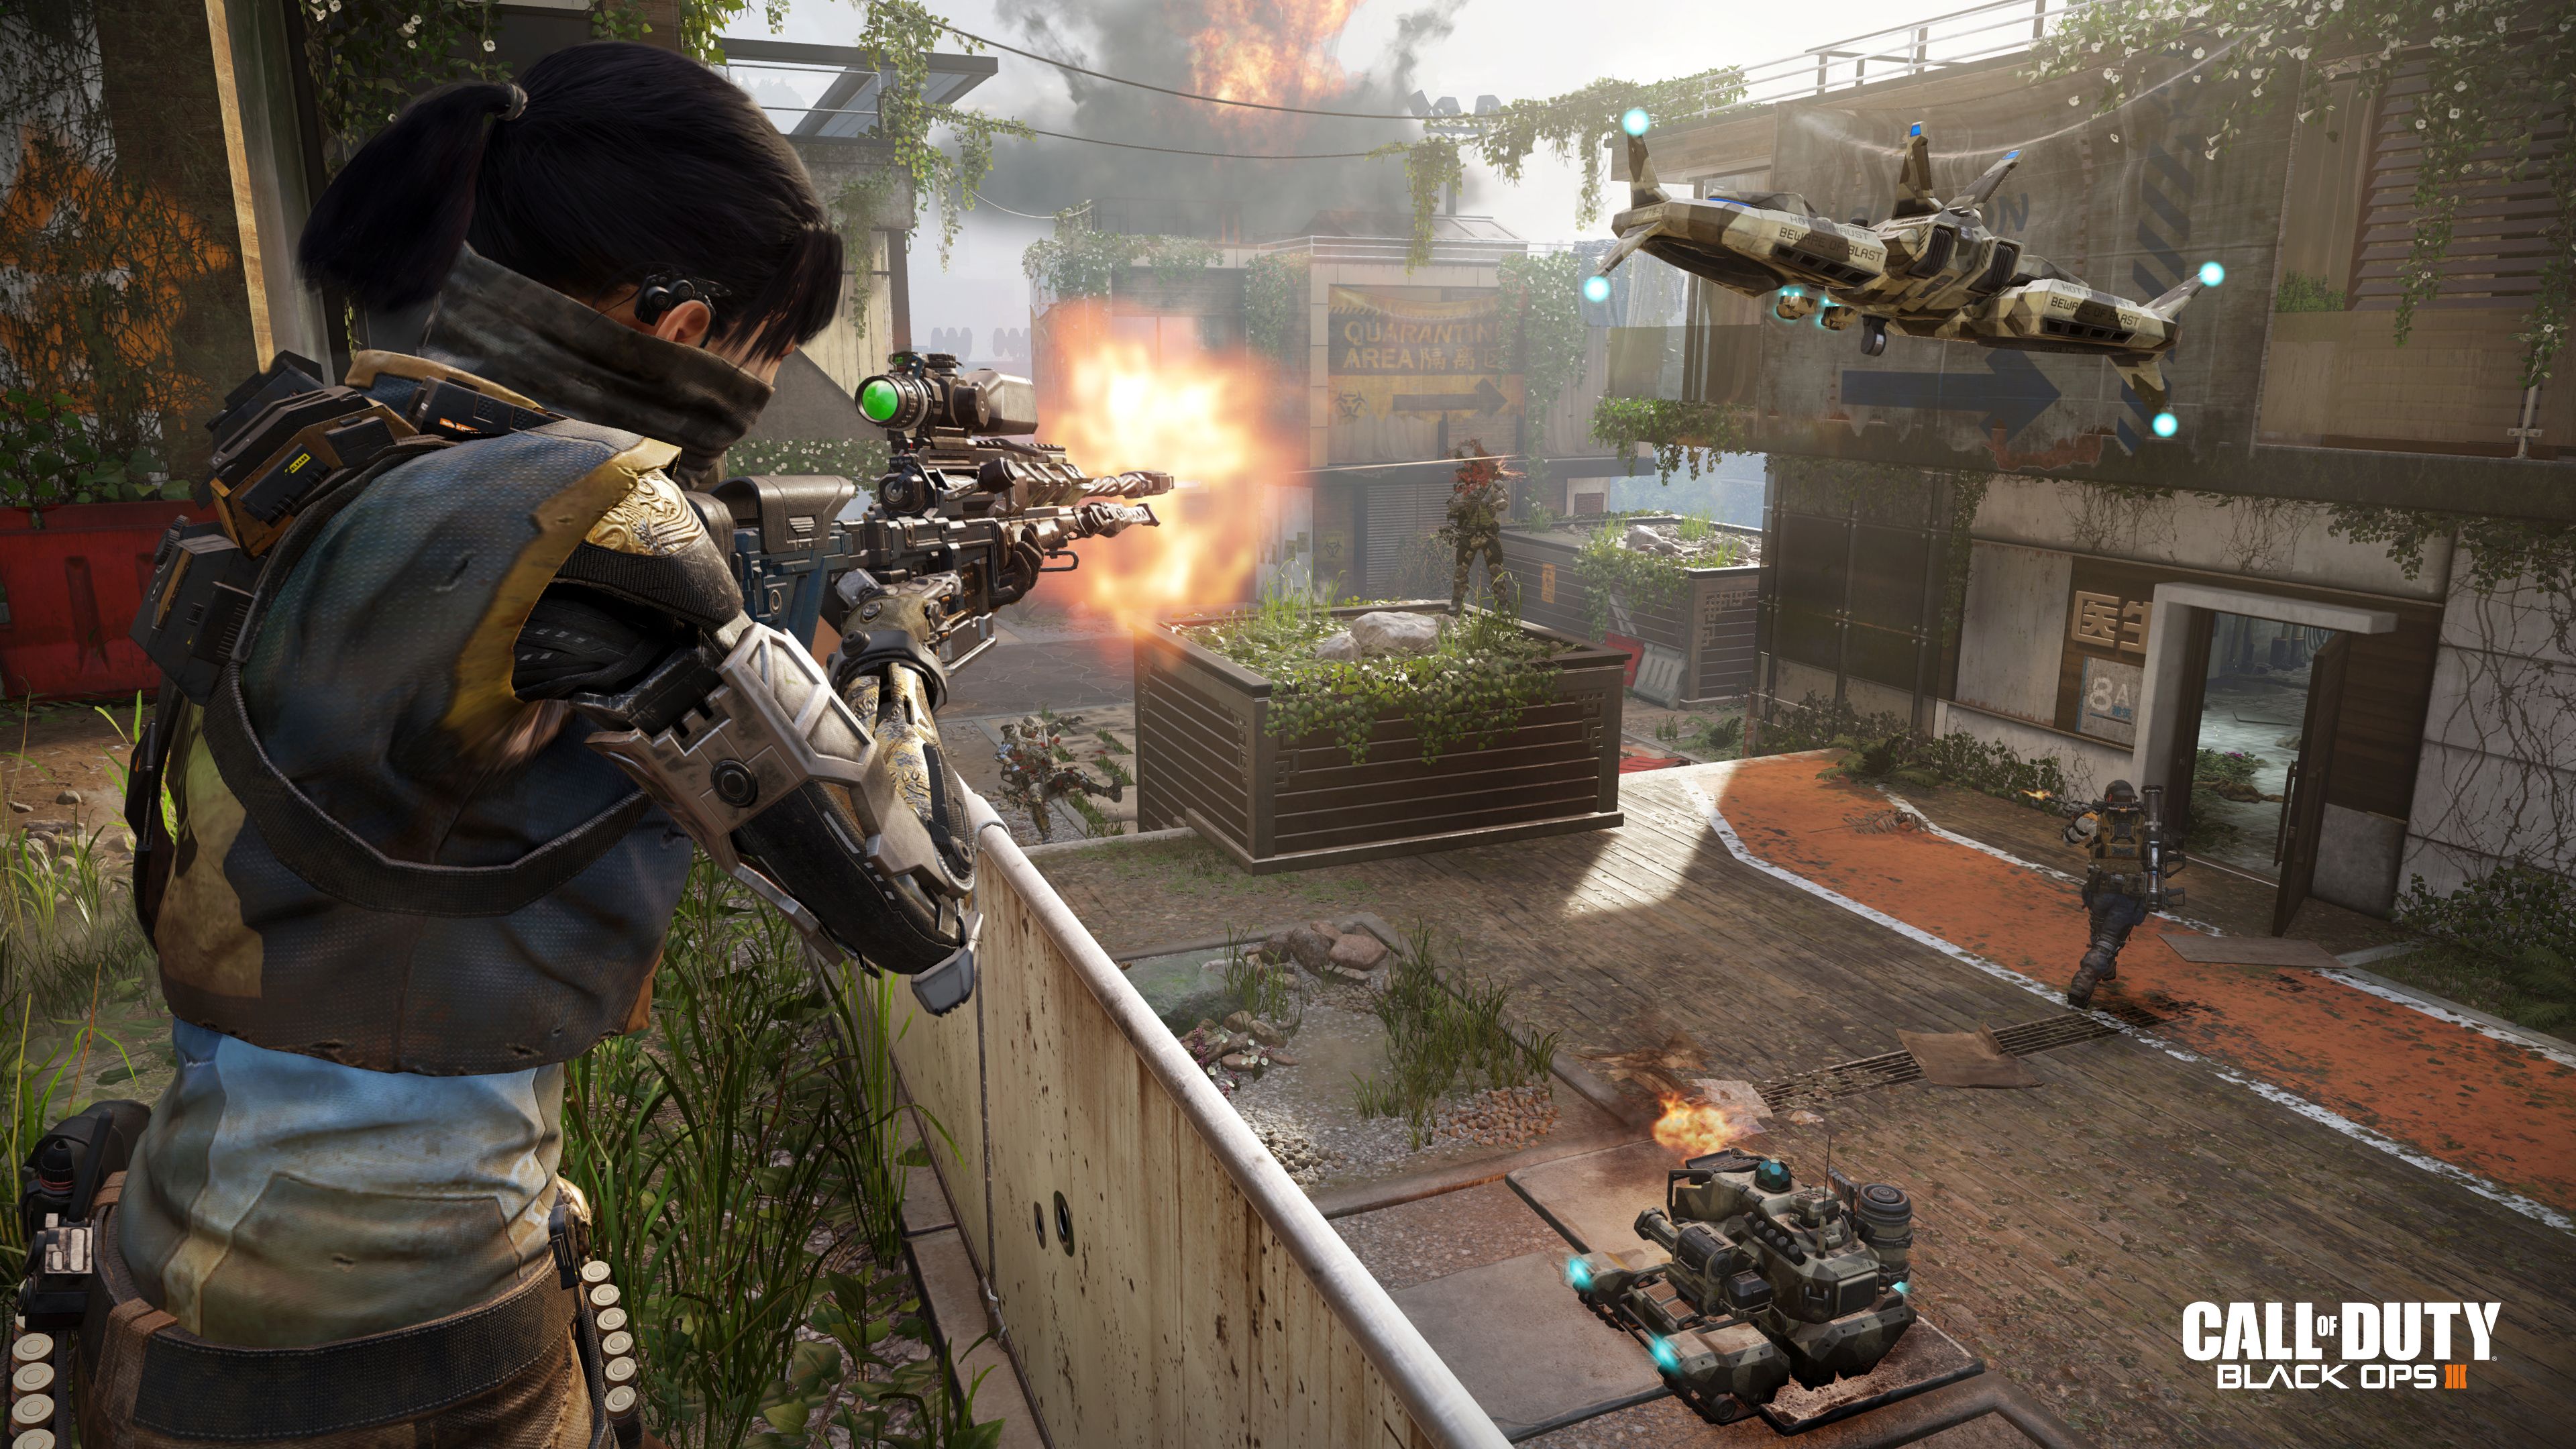 Download call of duty black ops 3 for android windows 7